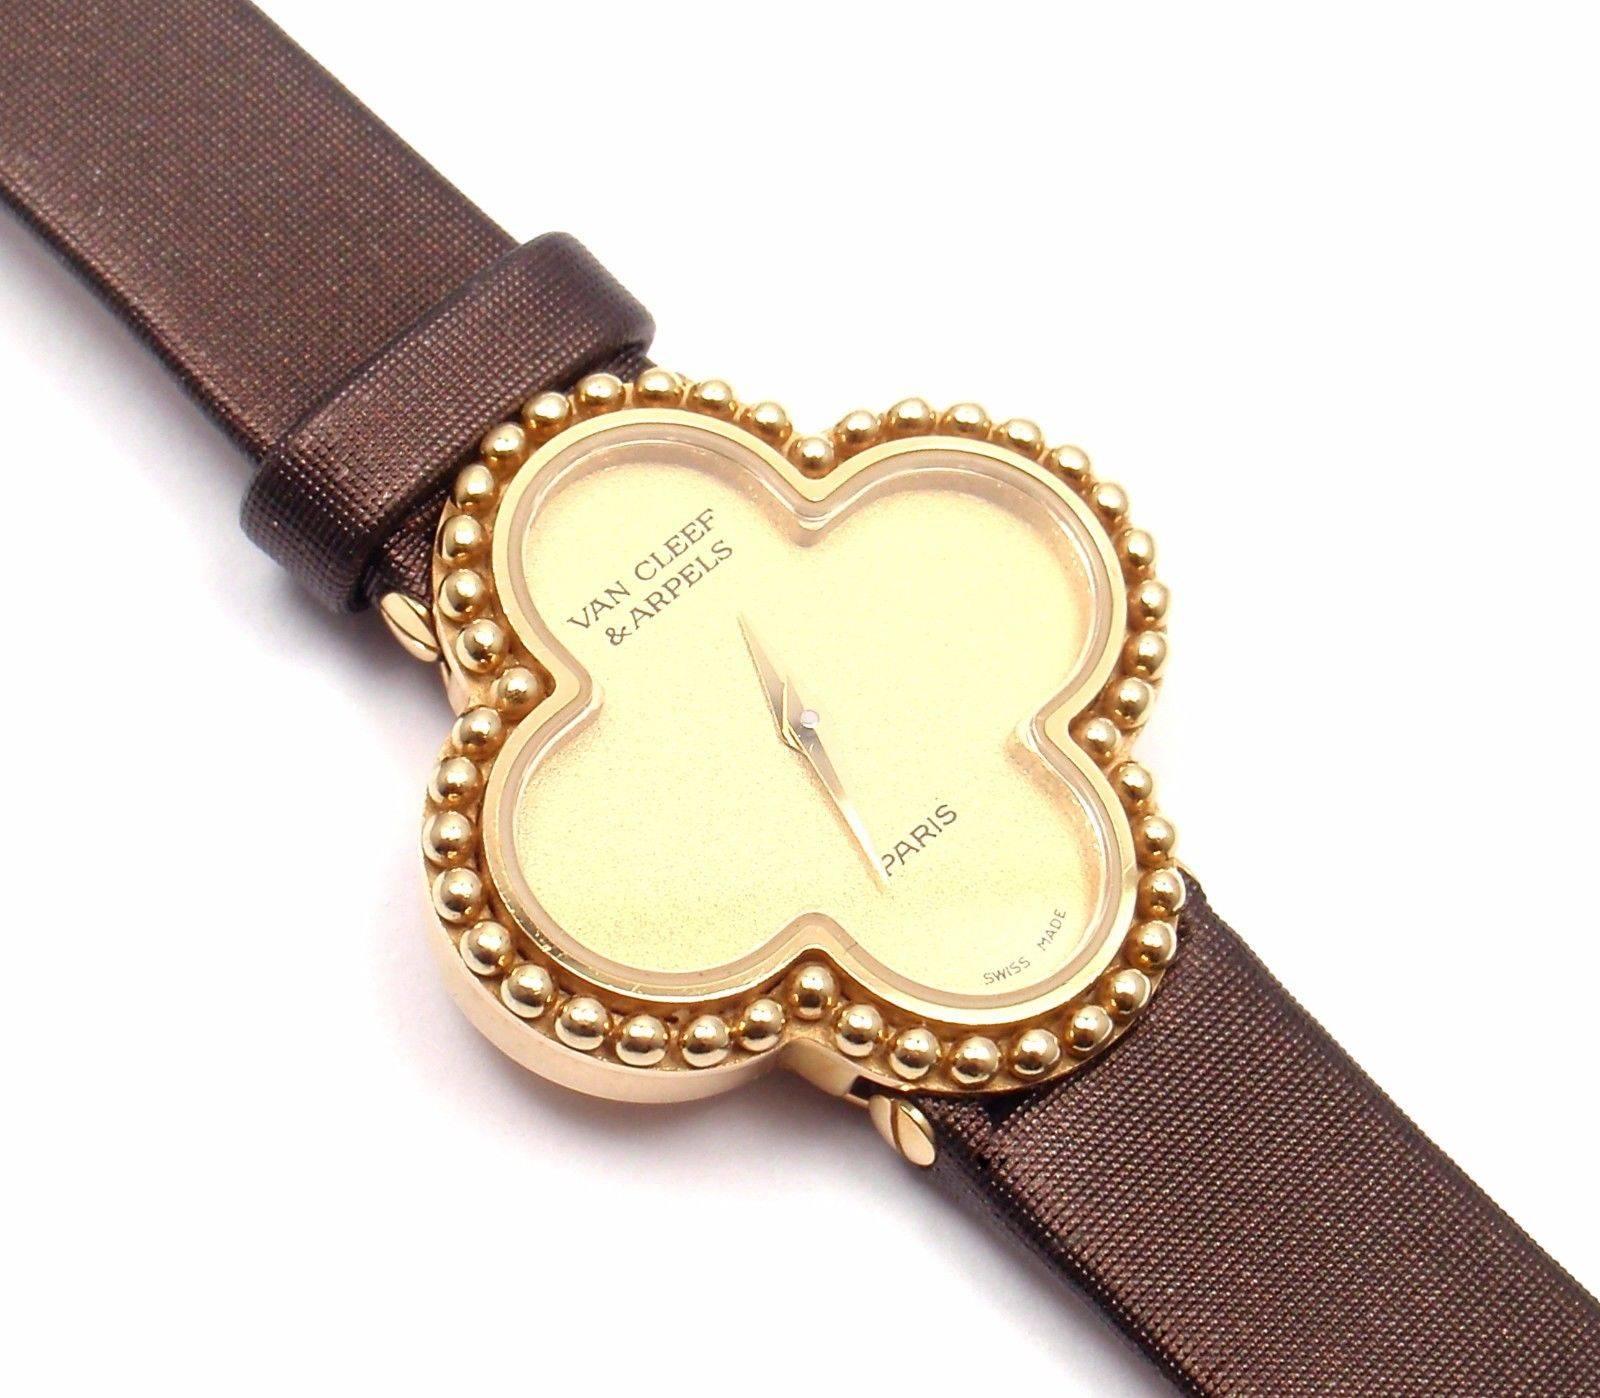 18k yellow gold Vintage Alhambra lady's quartz wristwatch designed by Van Cleef & Arpels. 

Details: 
Case Size: 26mm x 26mm
Band: New! Brown Satin Strap with original VCA 18k Yellow Gold Buckle
Dial: Gold color
Movement: Quartz
Stamped